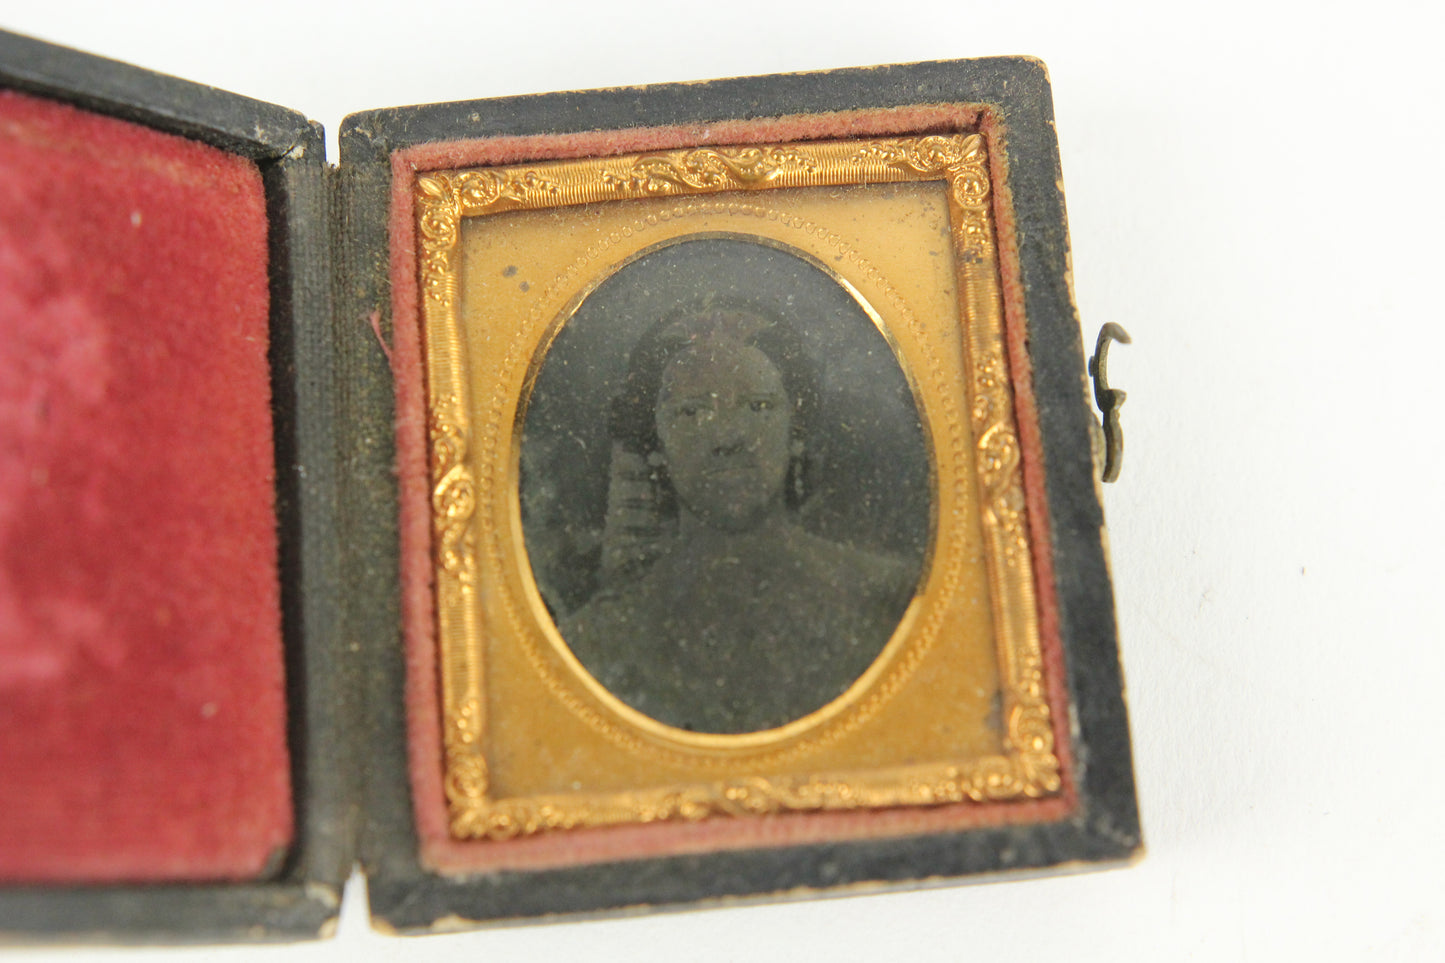 Ambrotype Photograph of A Pretty Young Woman in a Full Intact Case